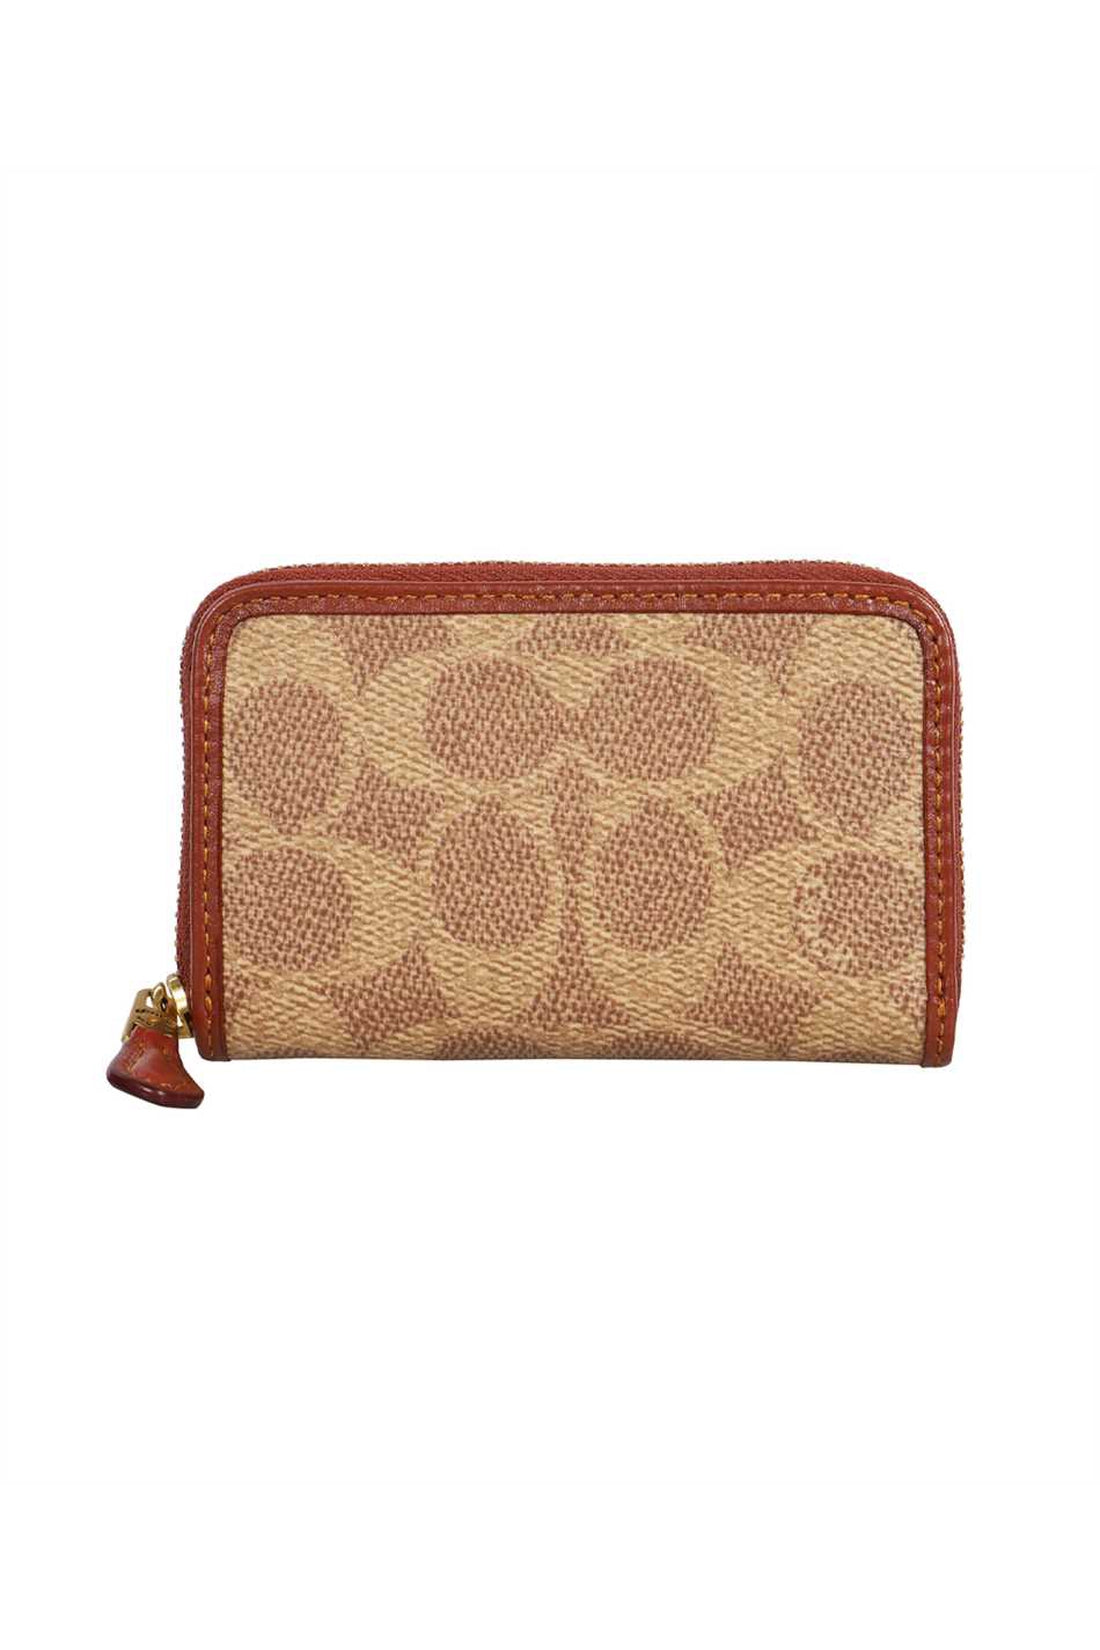 Coach-OUTLET-SALE-Coated canvas card holder-ARCHIVIST